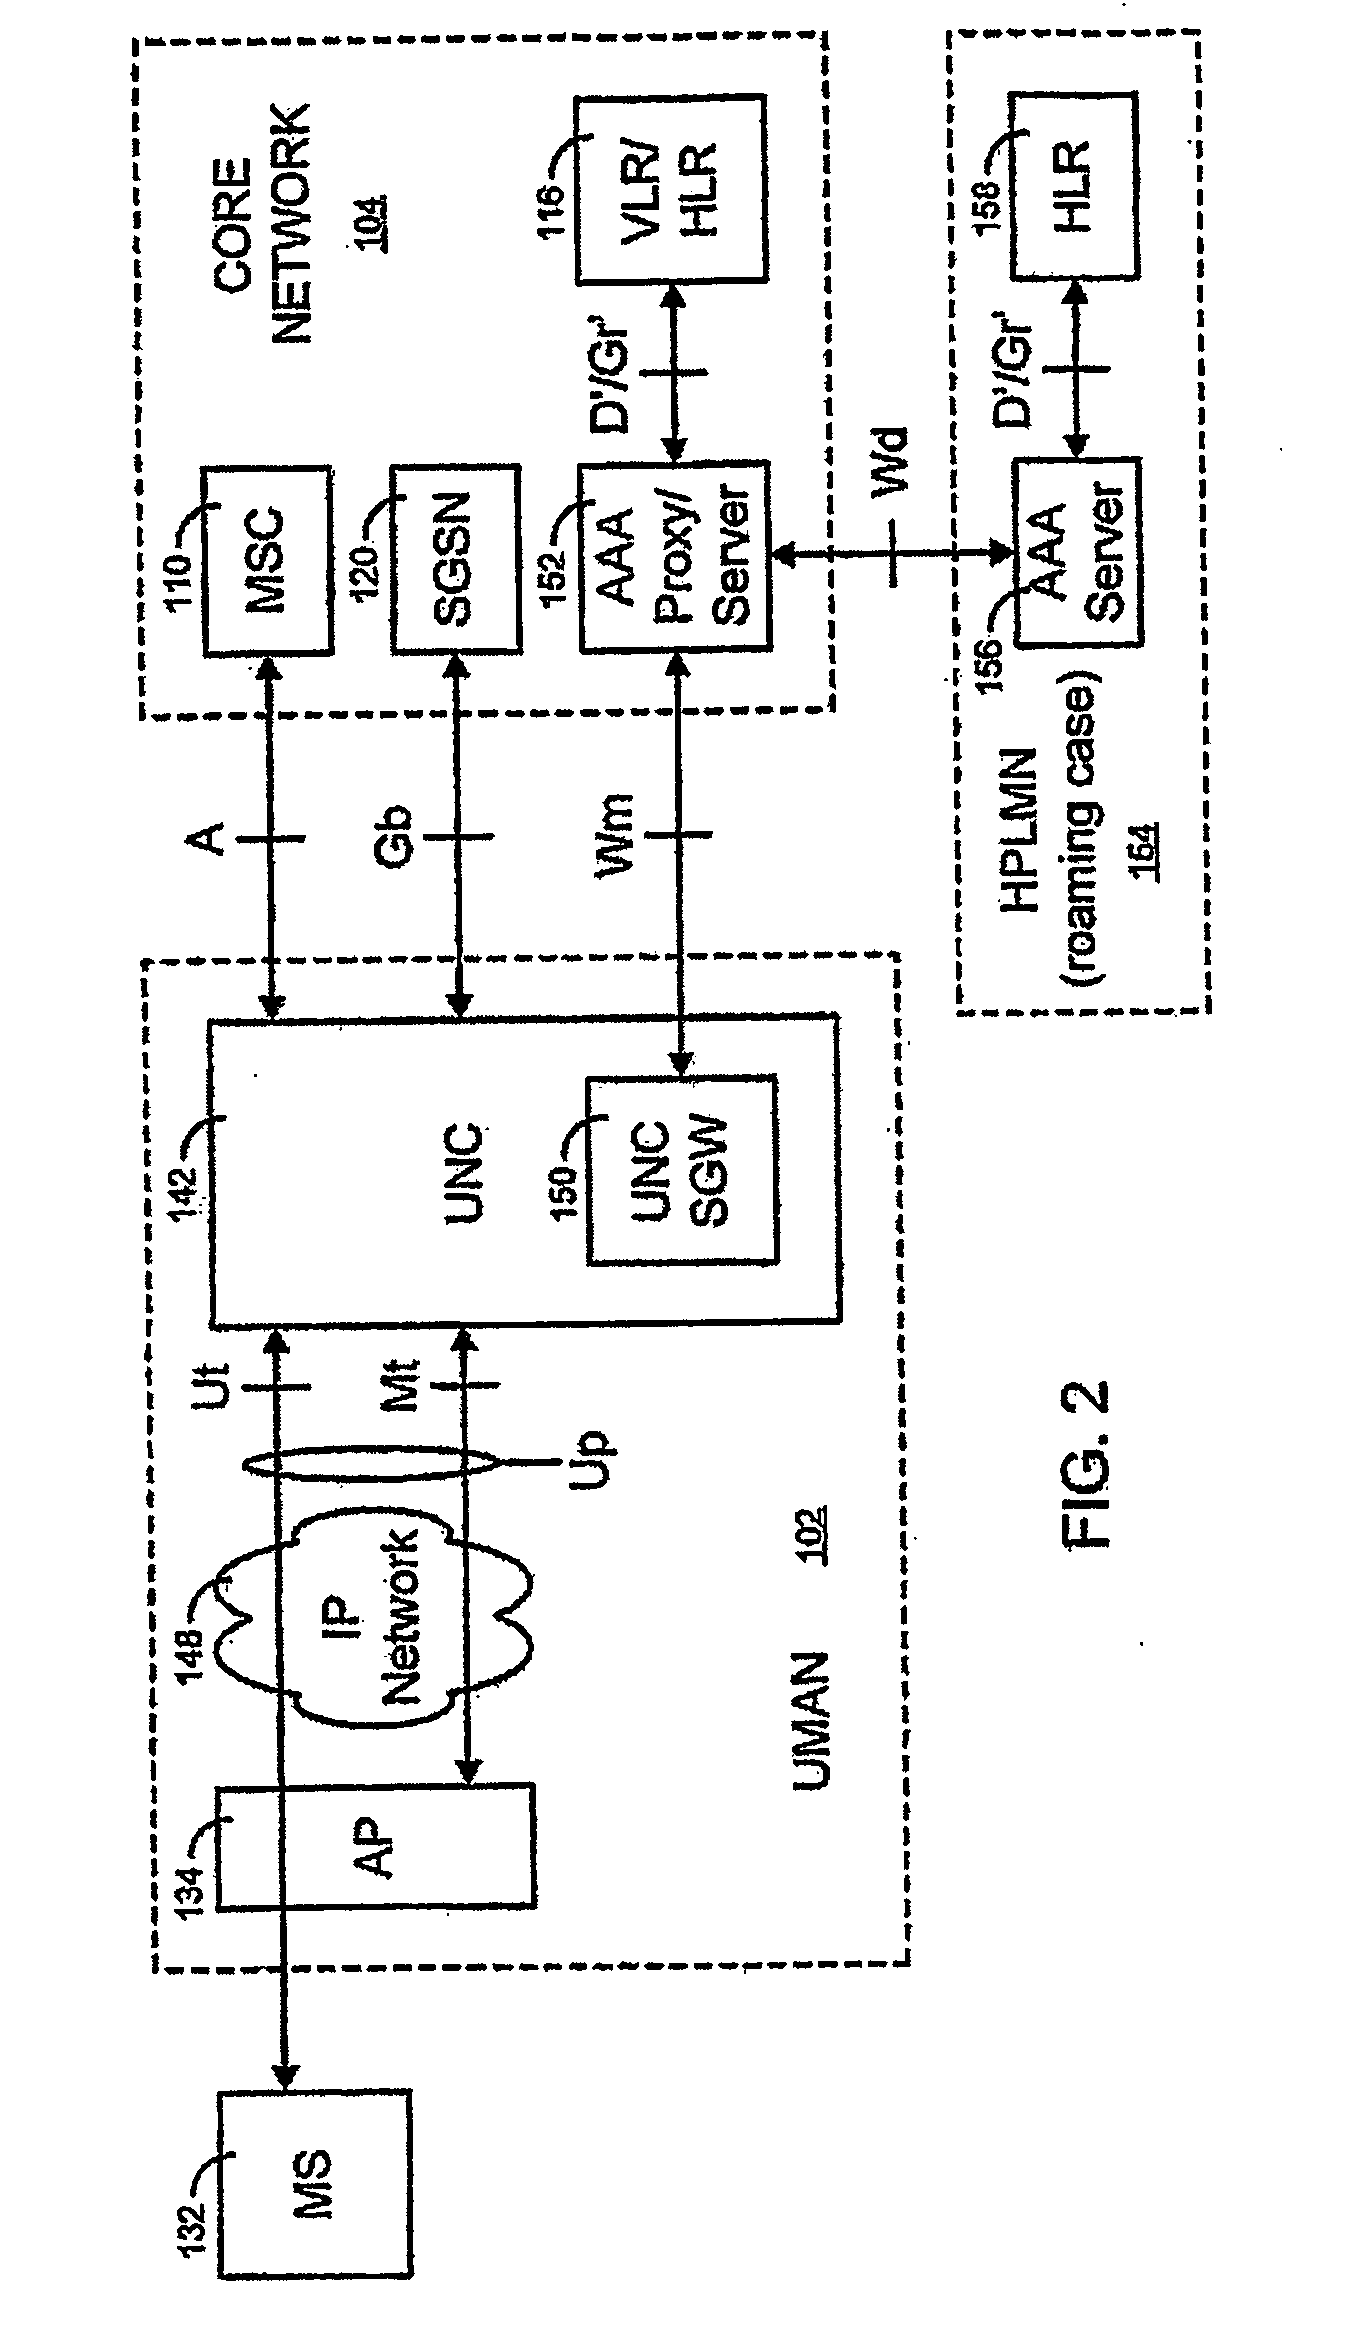 Method and system for improved handover of mobile stations to unlicensed mobile access networks